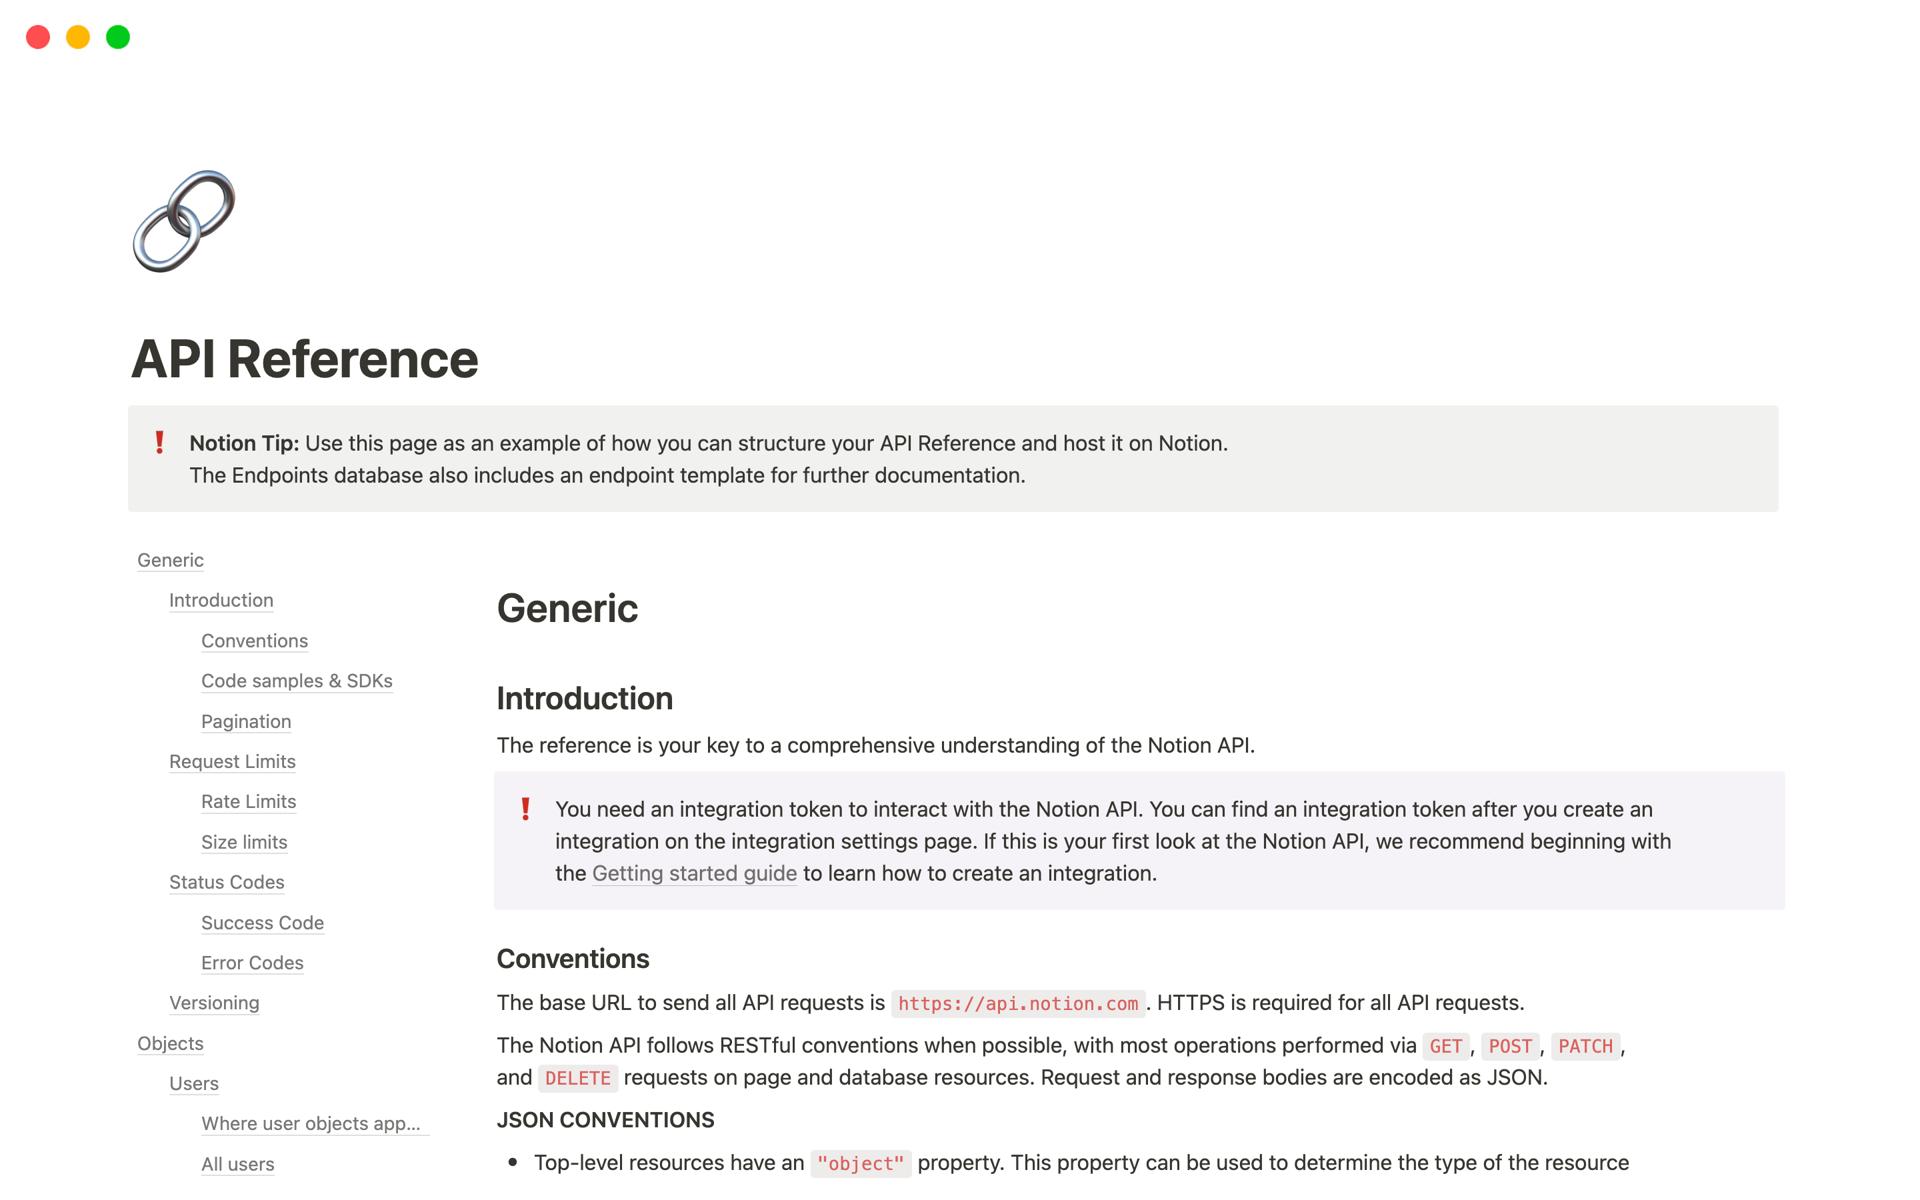 Host your API Reference right within Notion.